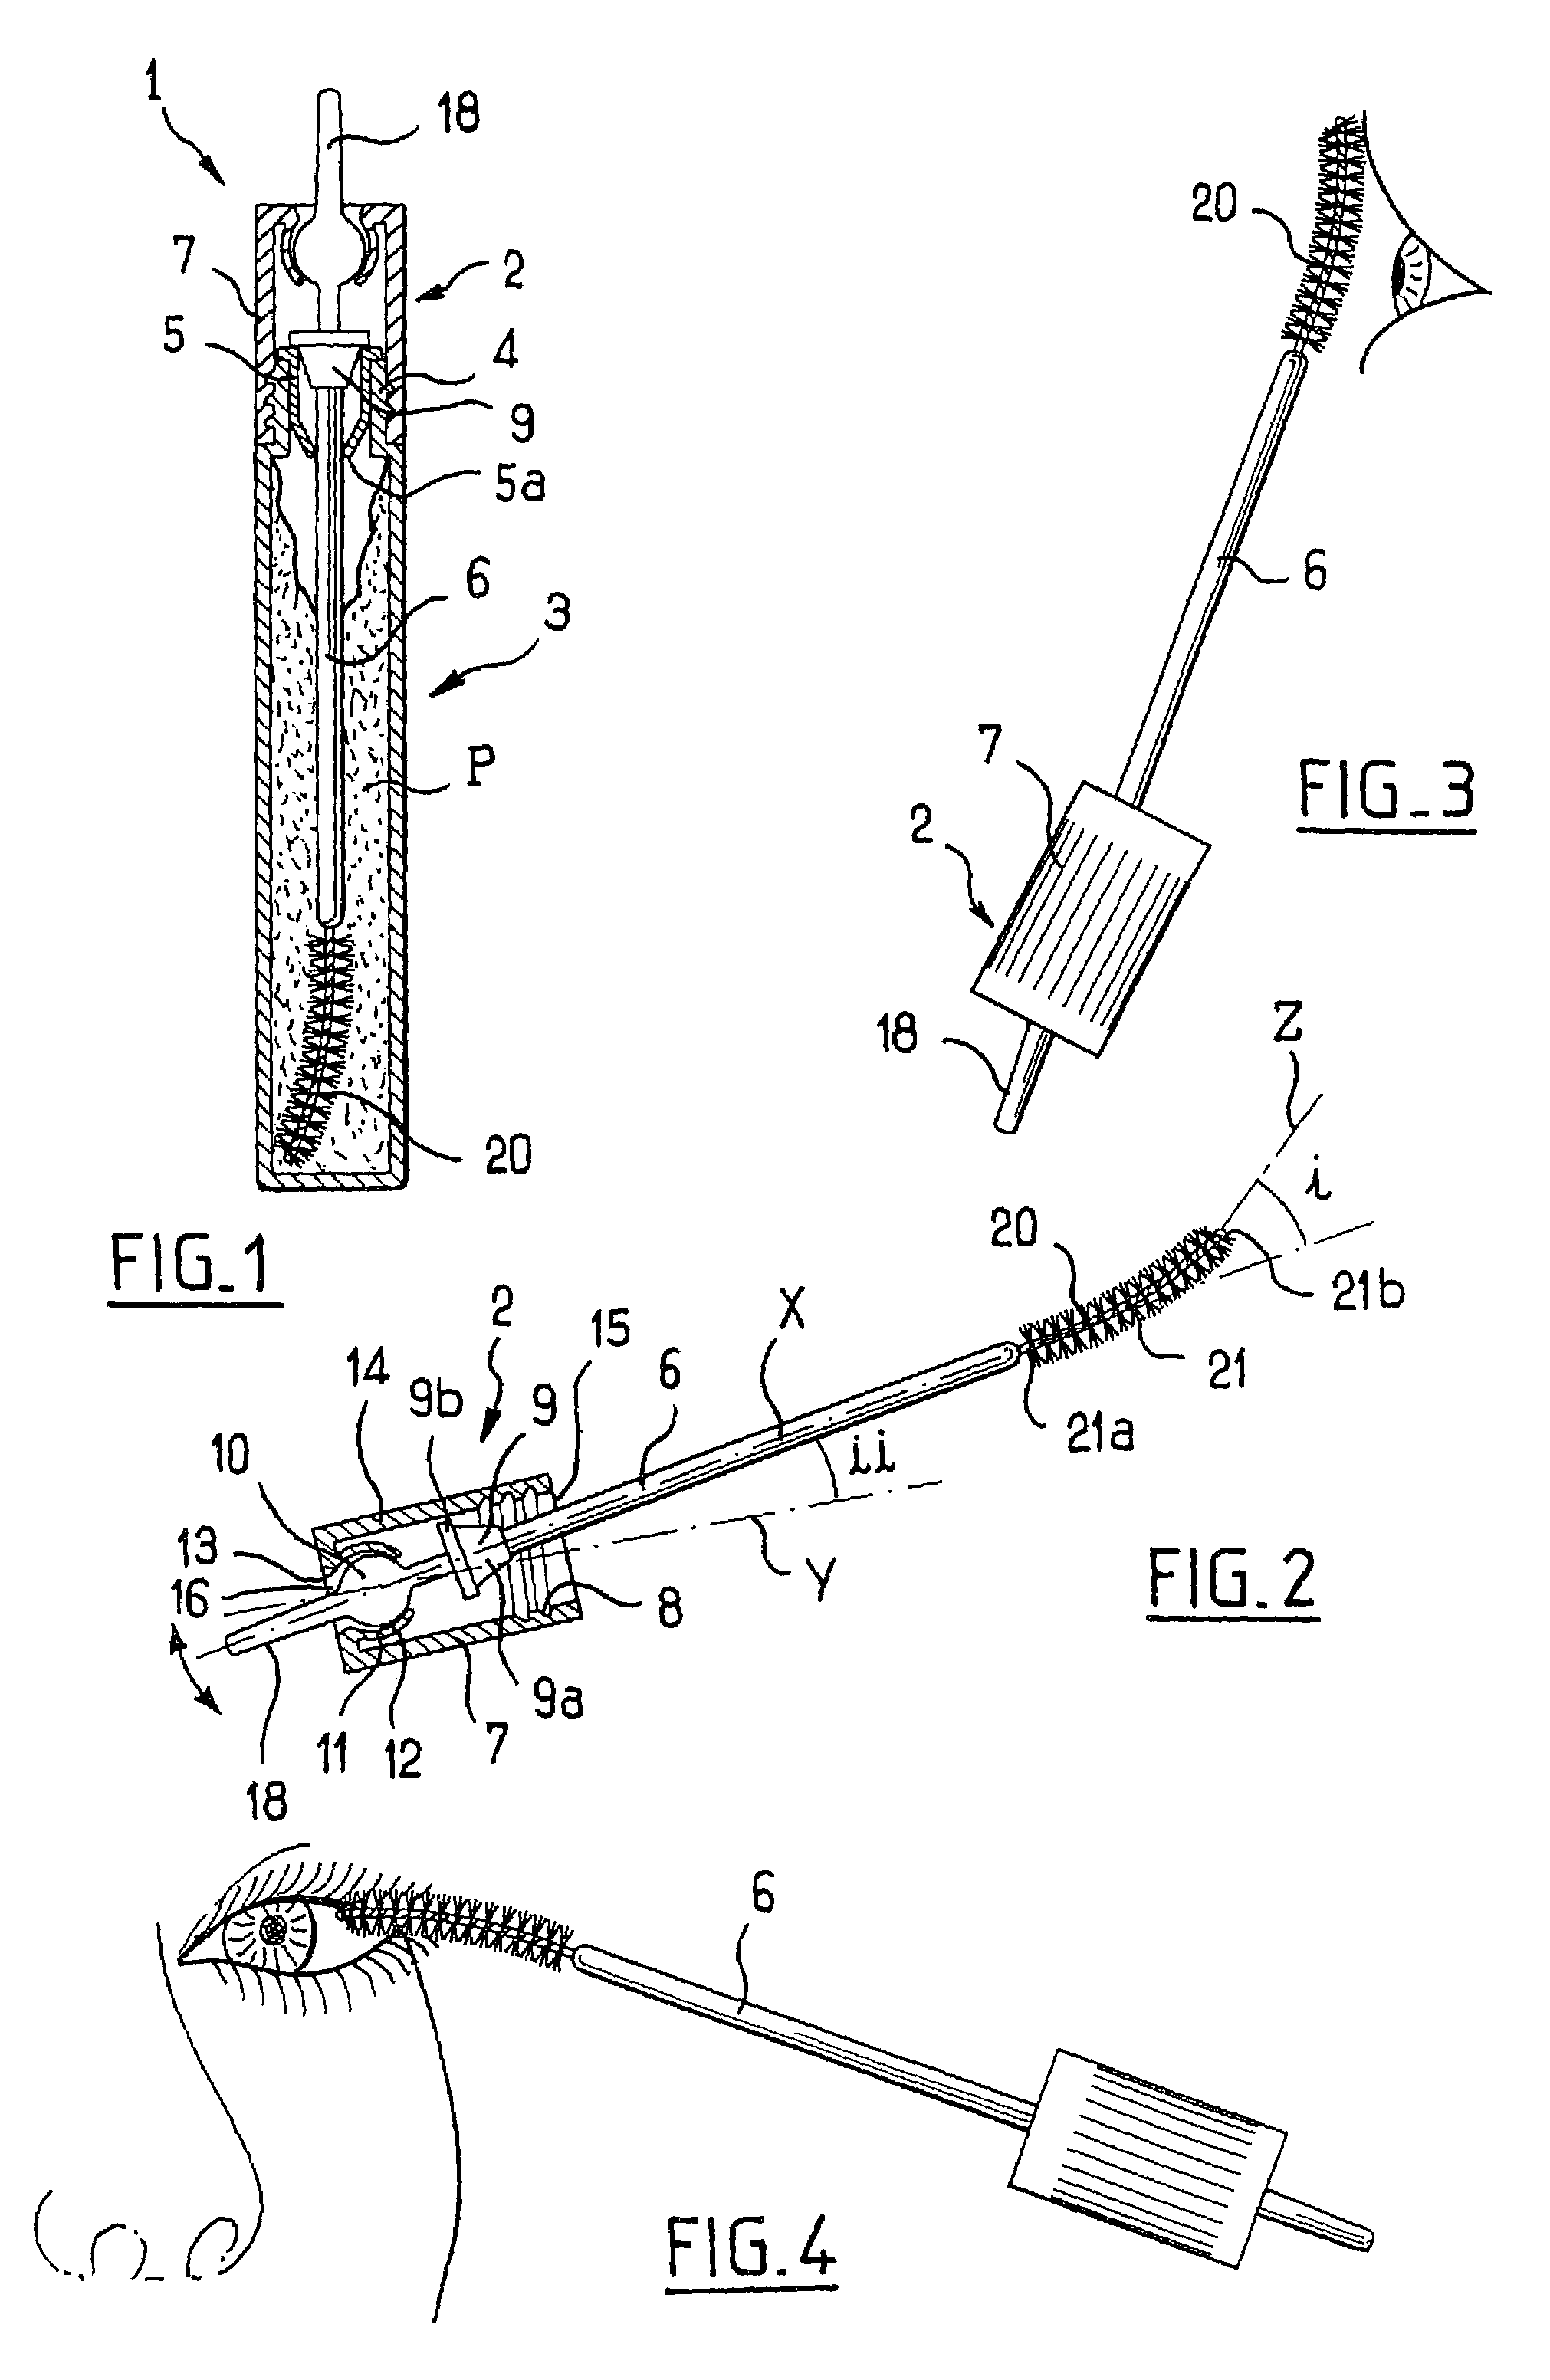 Applicator including a stem connected to a handle member via a hinge